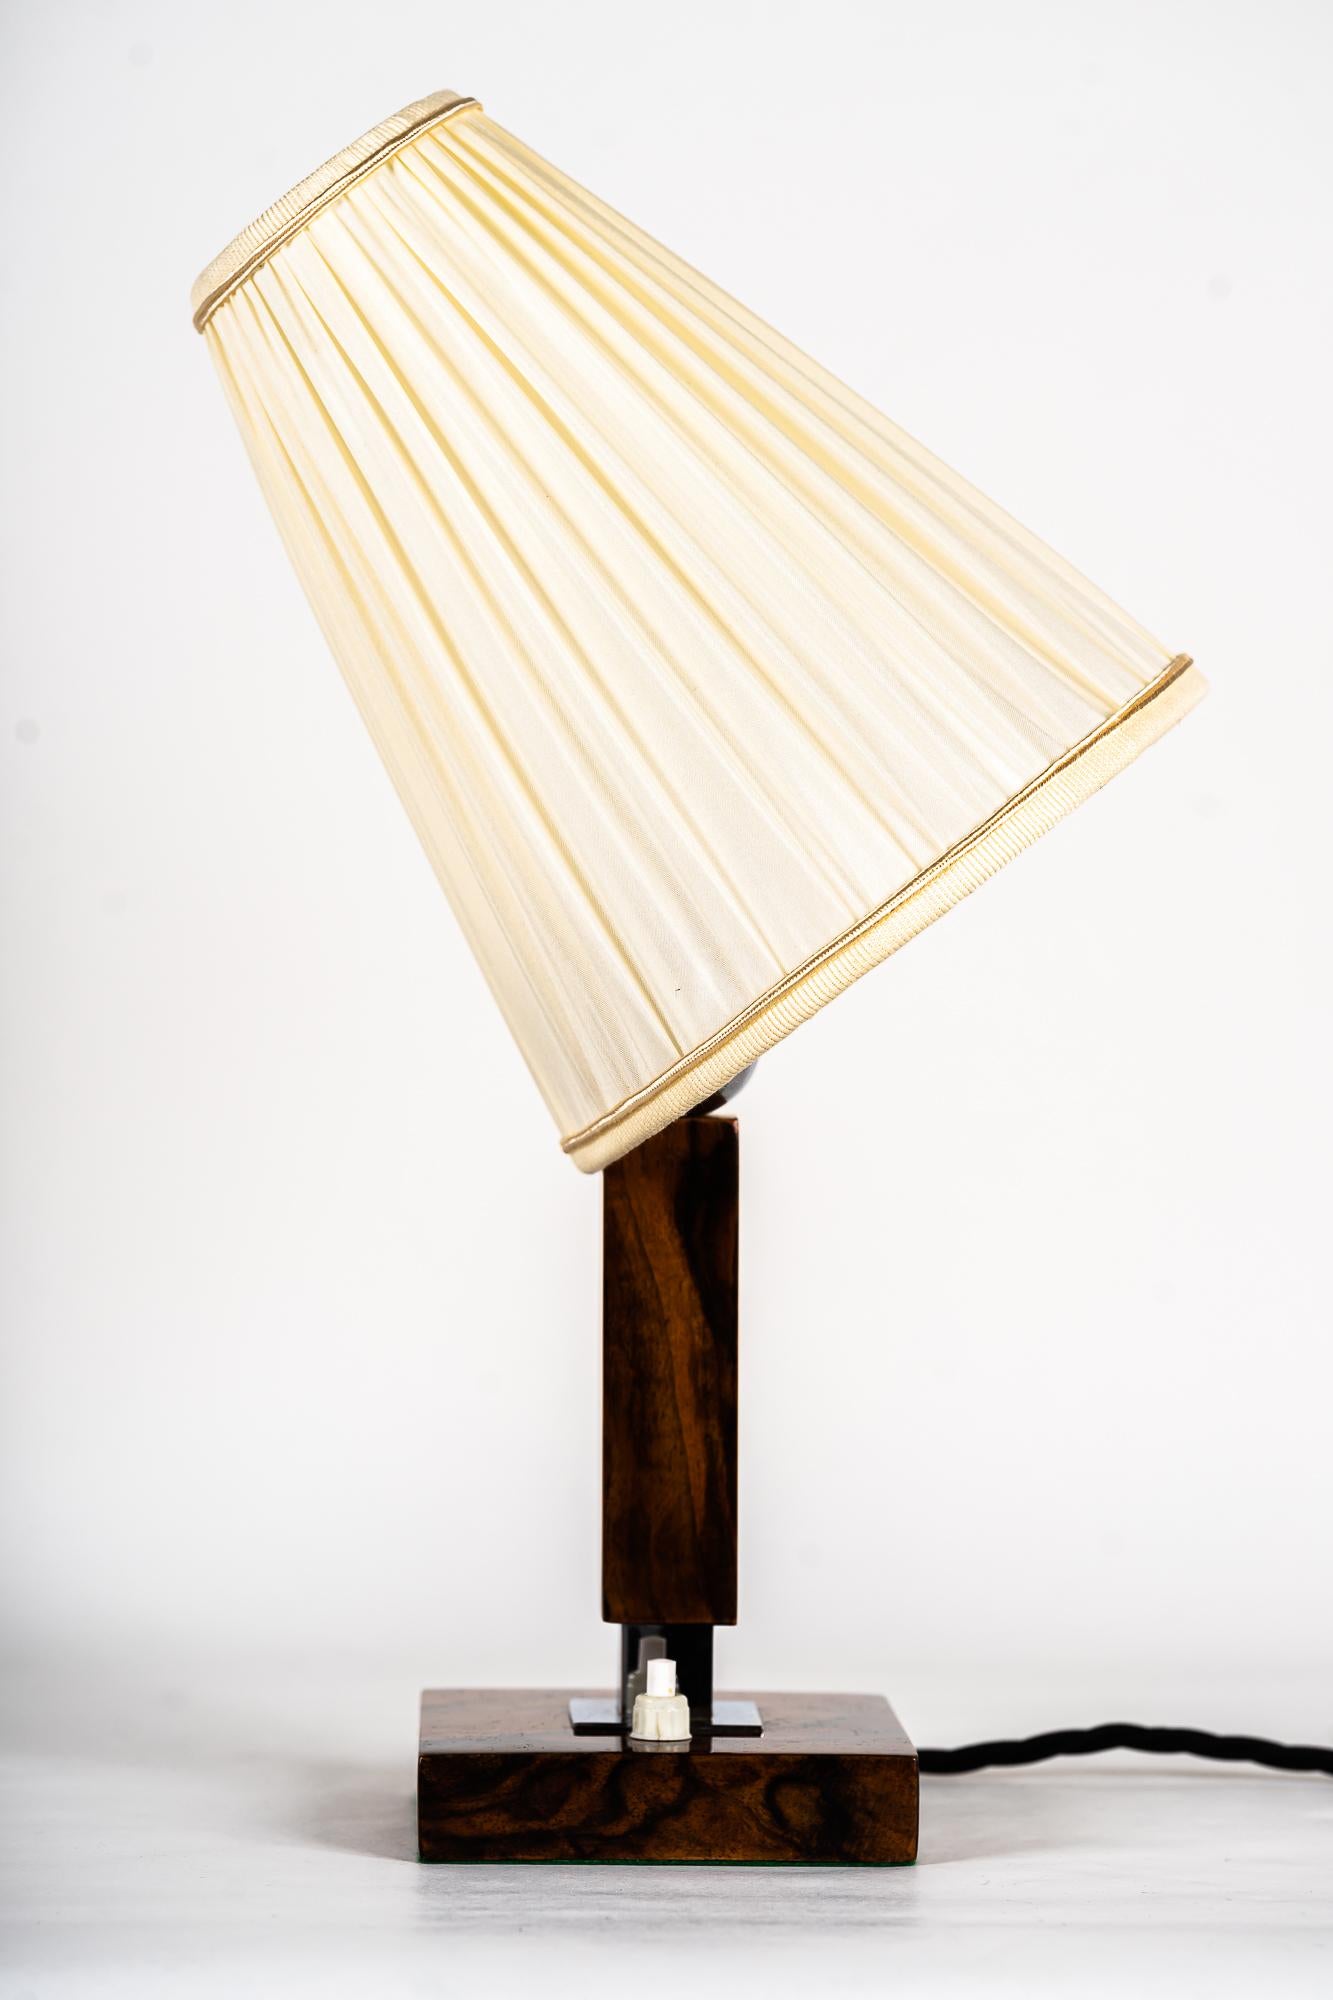 Wood table lamp with fabric shade around 1950s
Nickel polished
The shade is replaced ( new ).